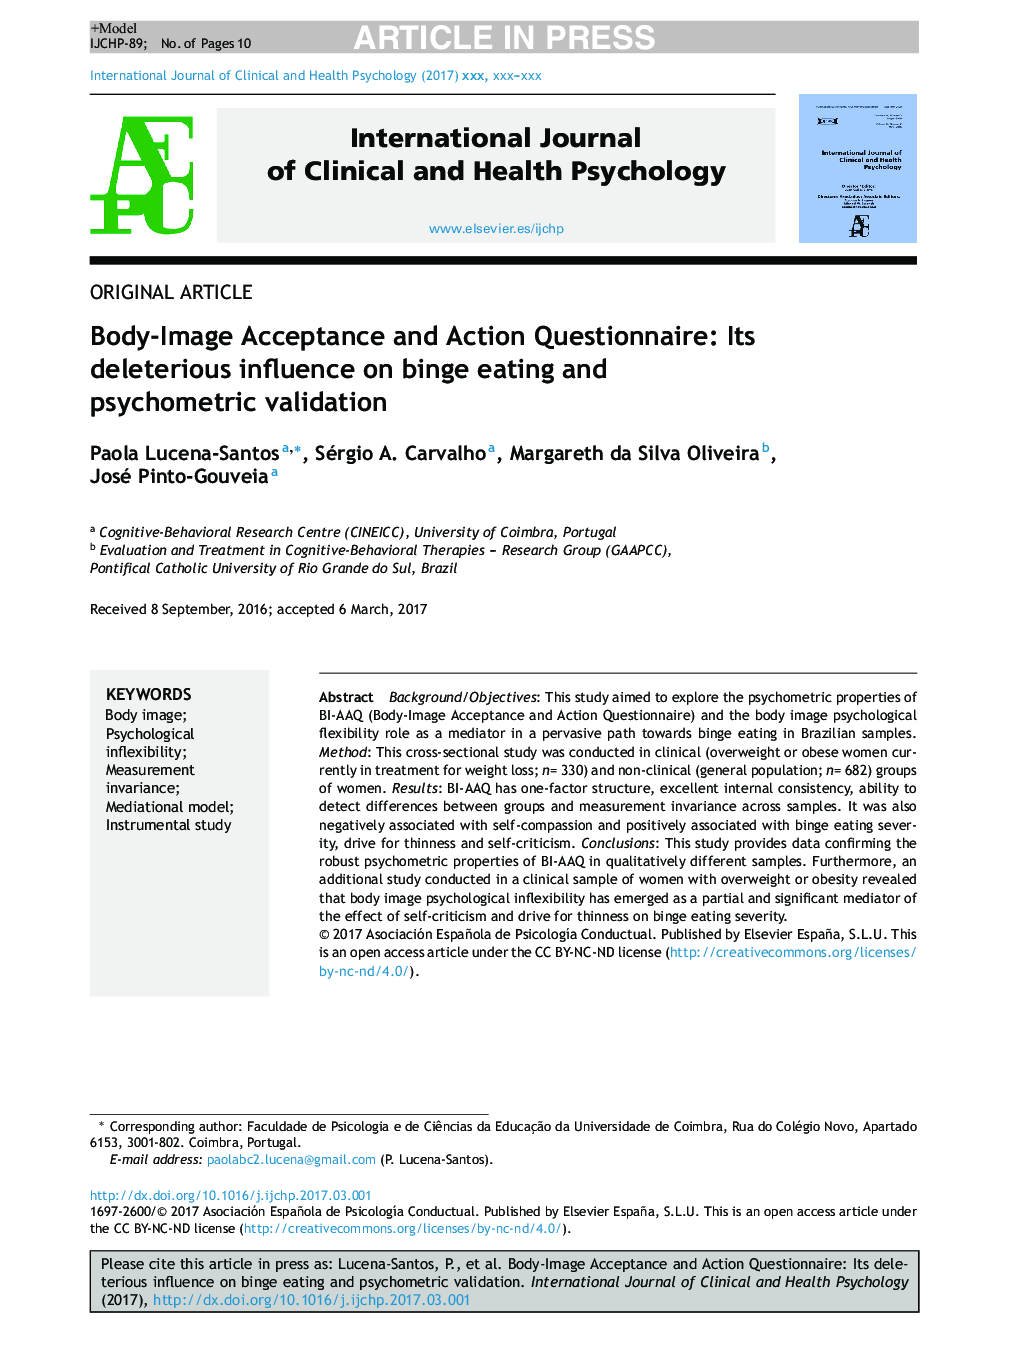 Body-Image Acceptance and Action Questionnaire: Its deleterious influence on binge eating and psychometric validation